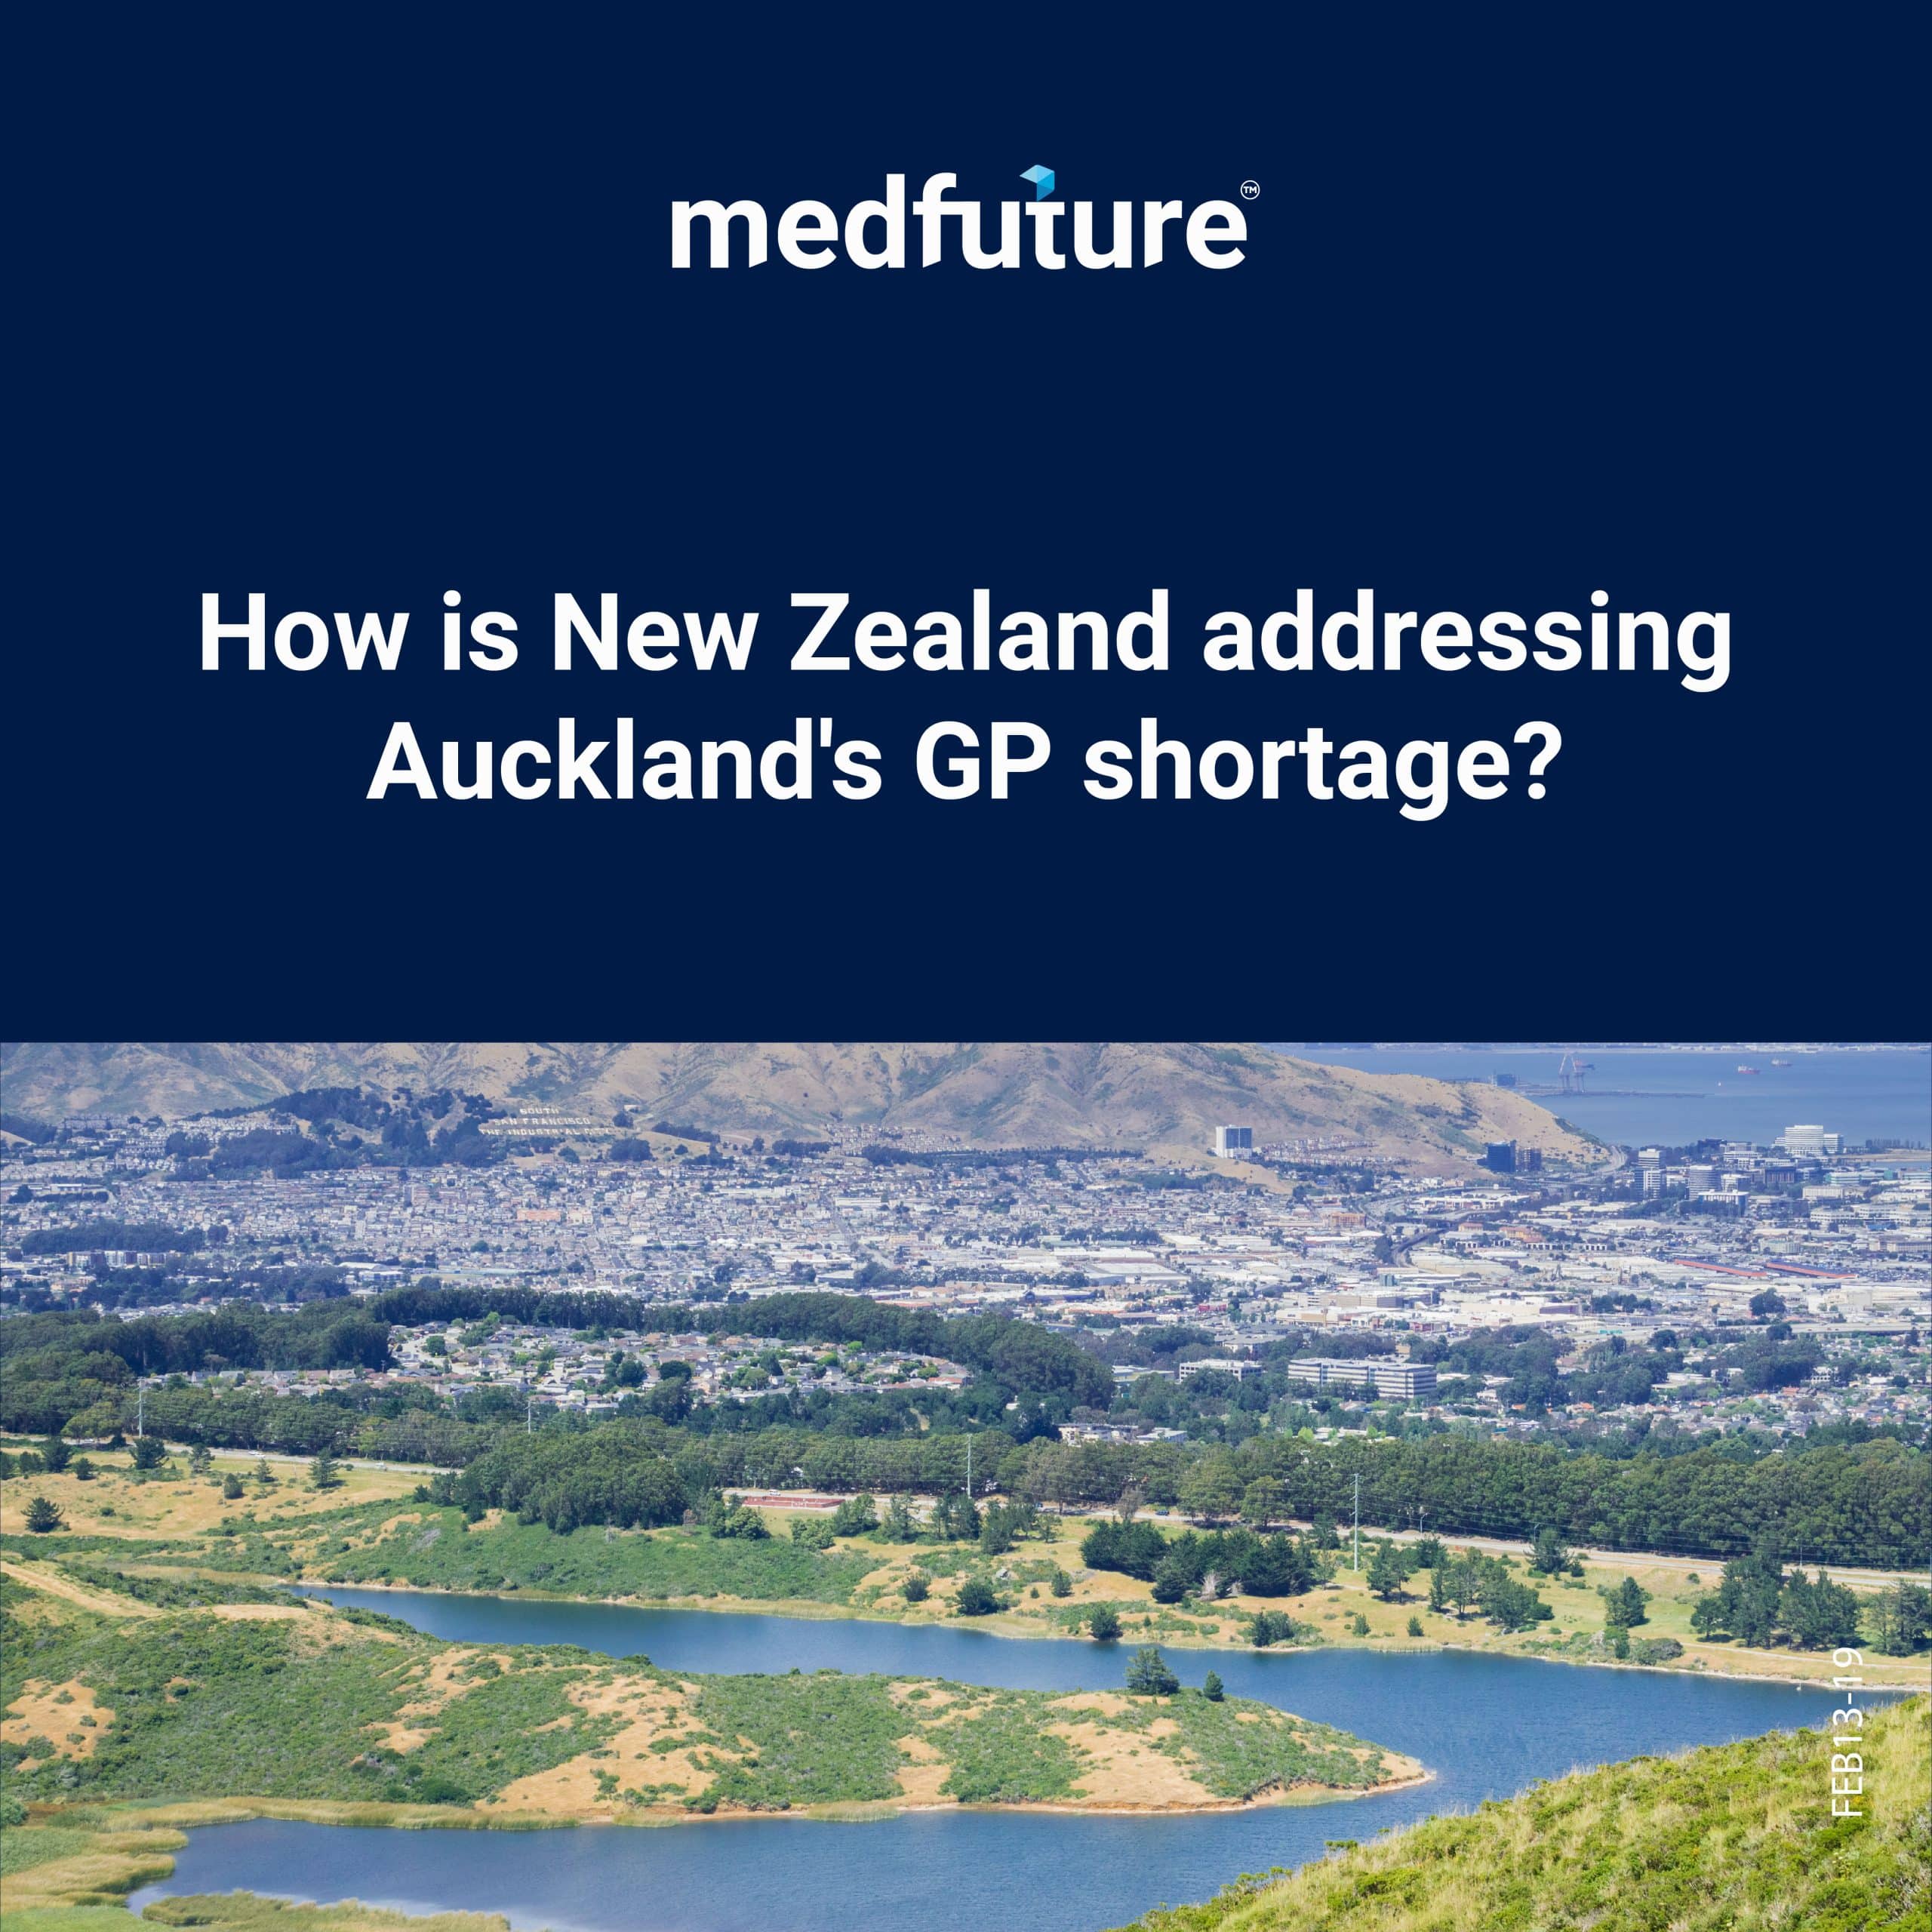 How is New Zealand addressing Auckland's GP shortage?